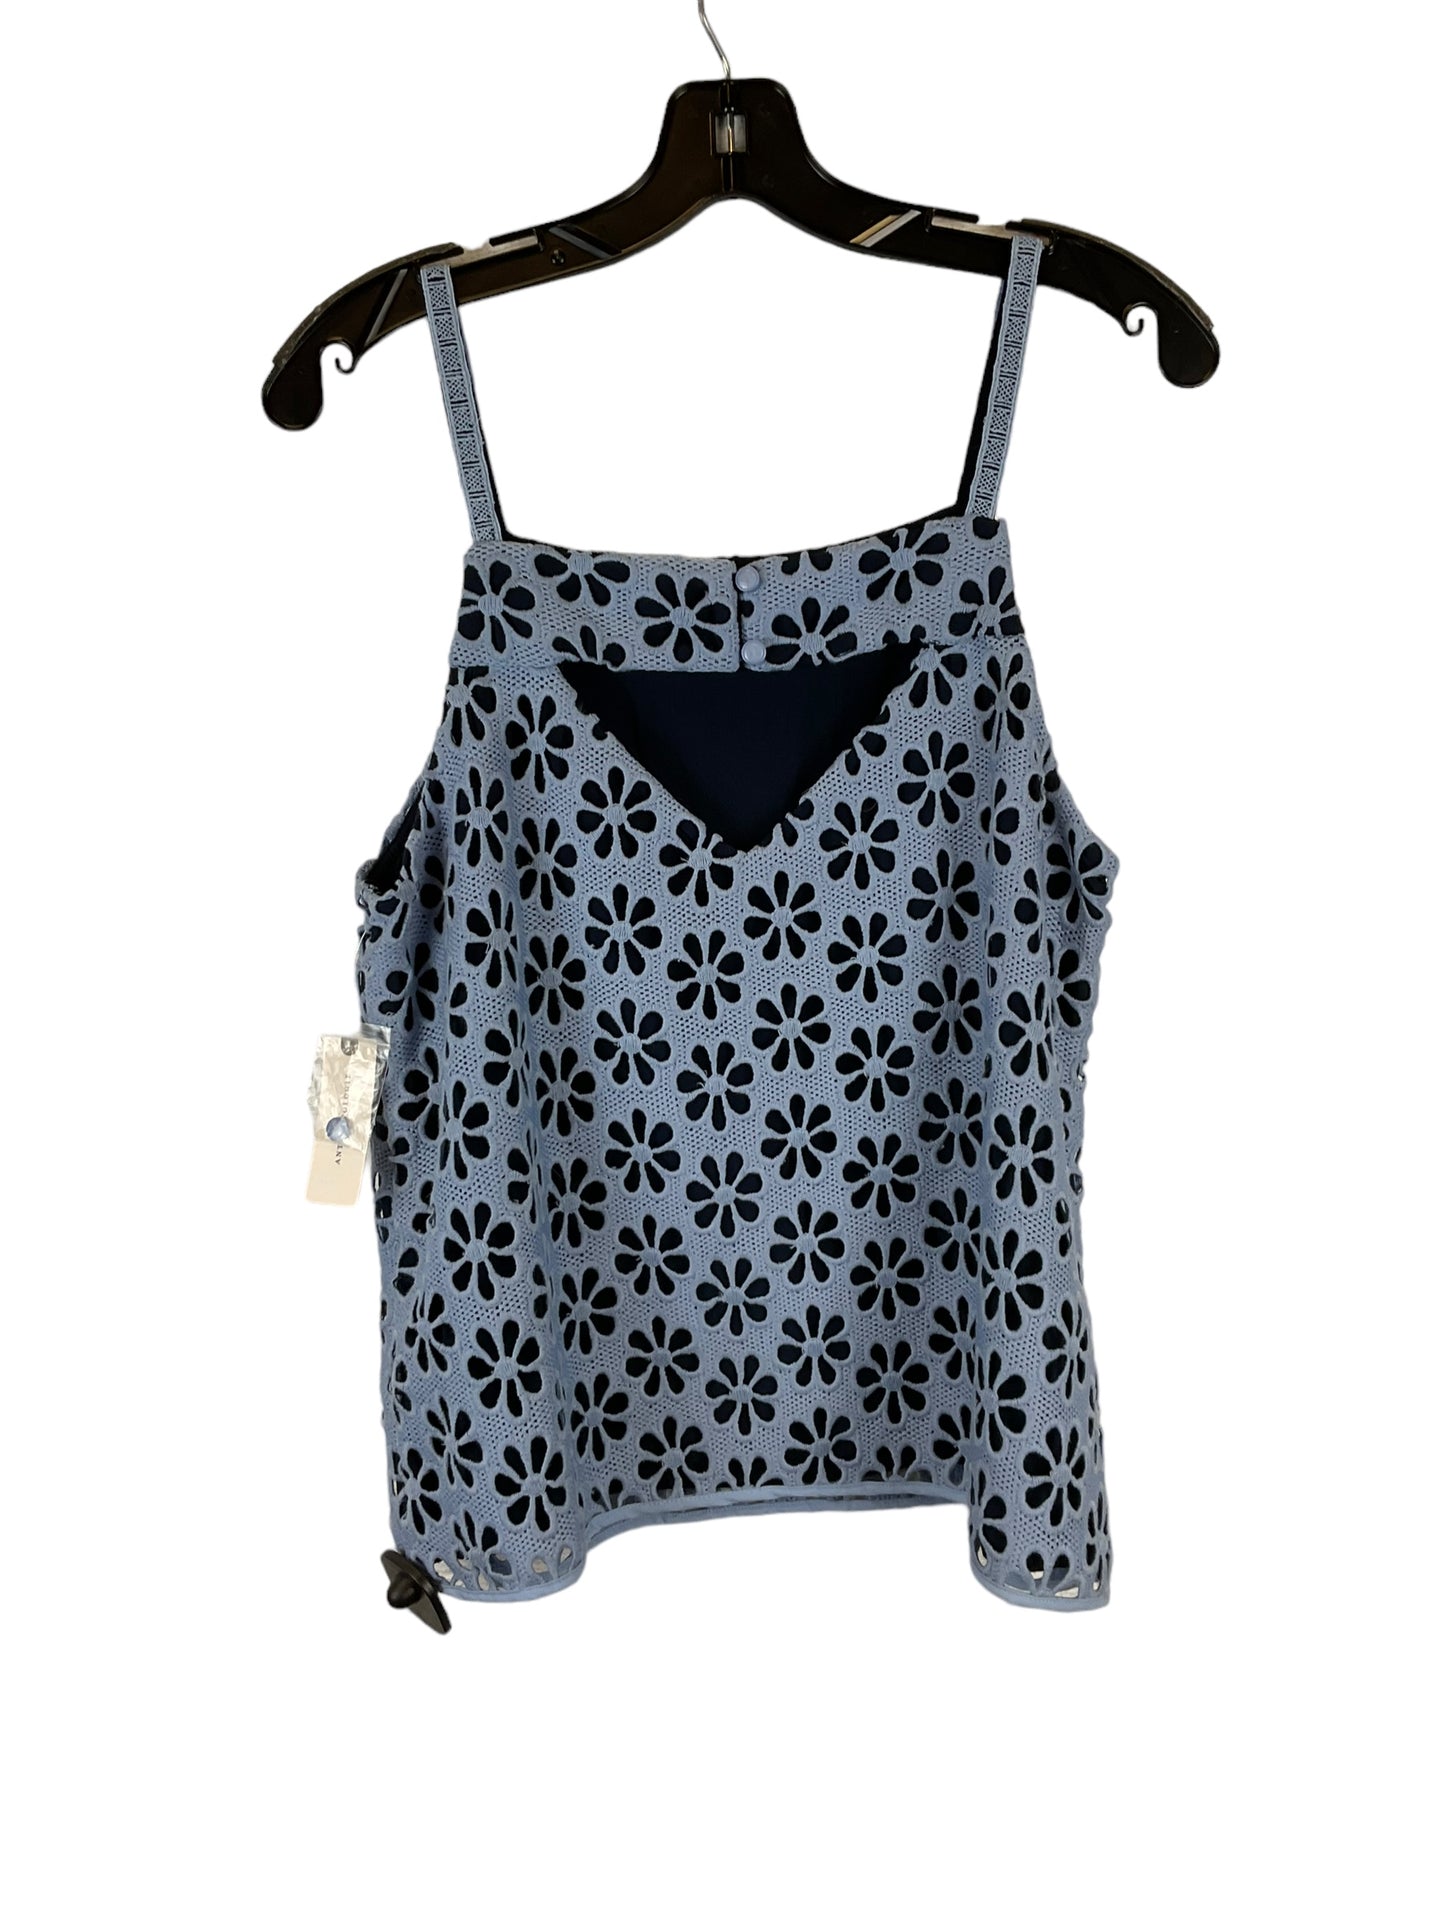 Top Sleeveless By Maeve  Size: L